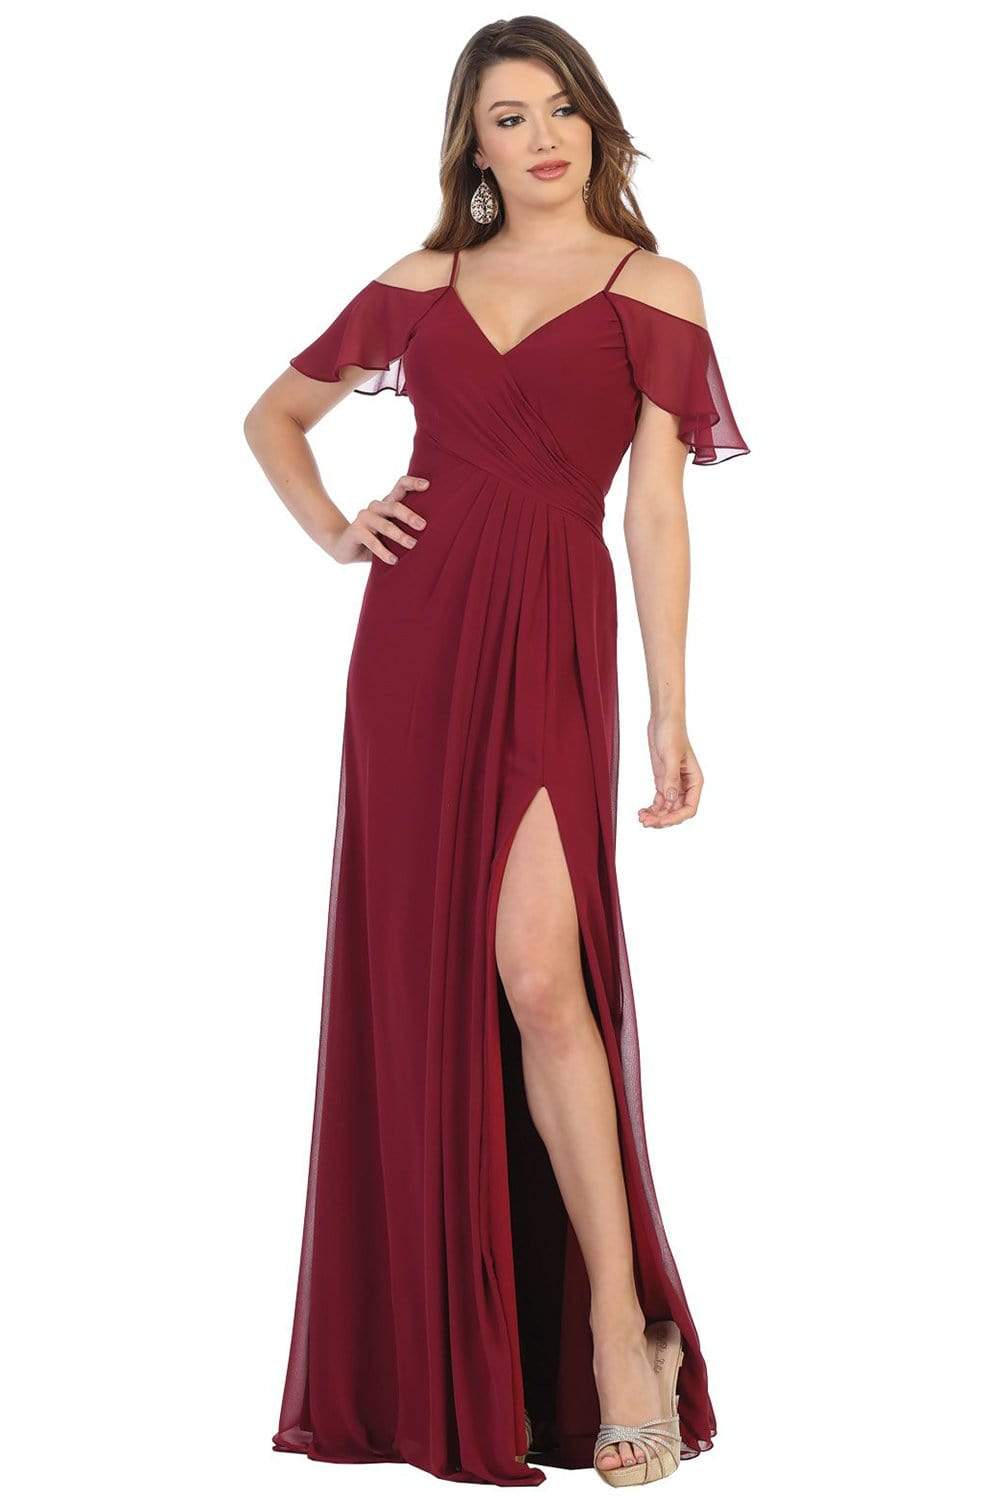 May Queen - MQ1732 Flounced Cold Shoulder Formal Chiffon Dress Formal Gowns 4 / Burgundy